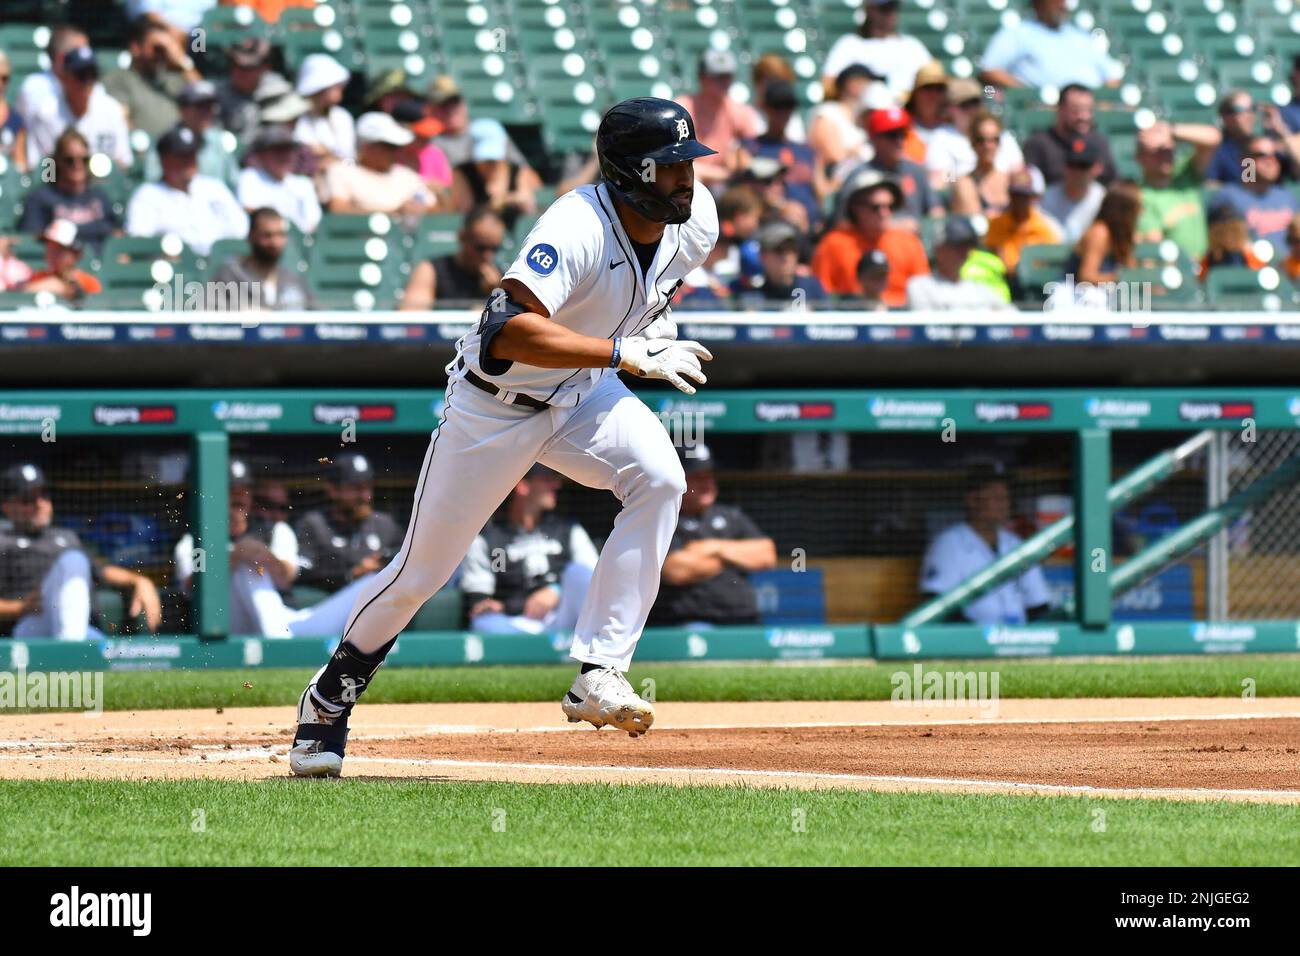 DETROIT, MI - AUGUST 24: Detroit Tigers center fielder Riley Greene (31)  runs out a groundball during the Detroit Tigers versus the San Francisco  Giants on Wednesday August 24, 2022 at Comerica